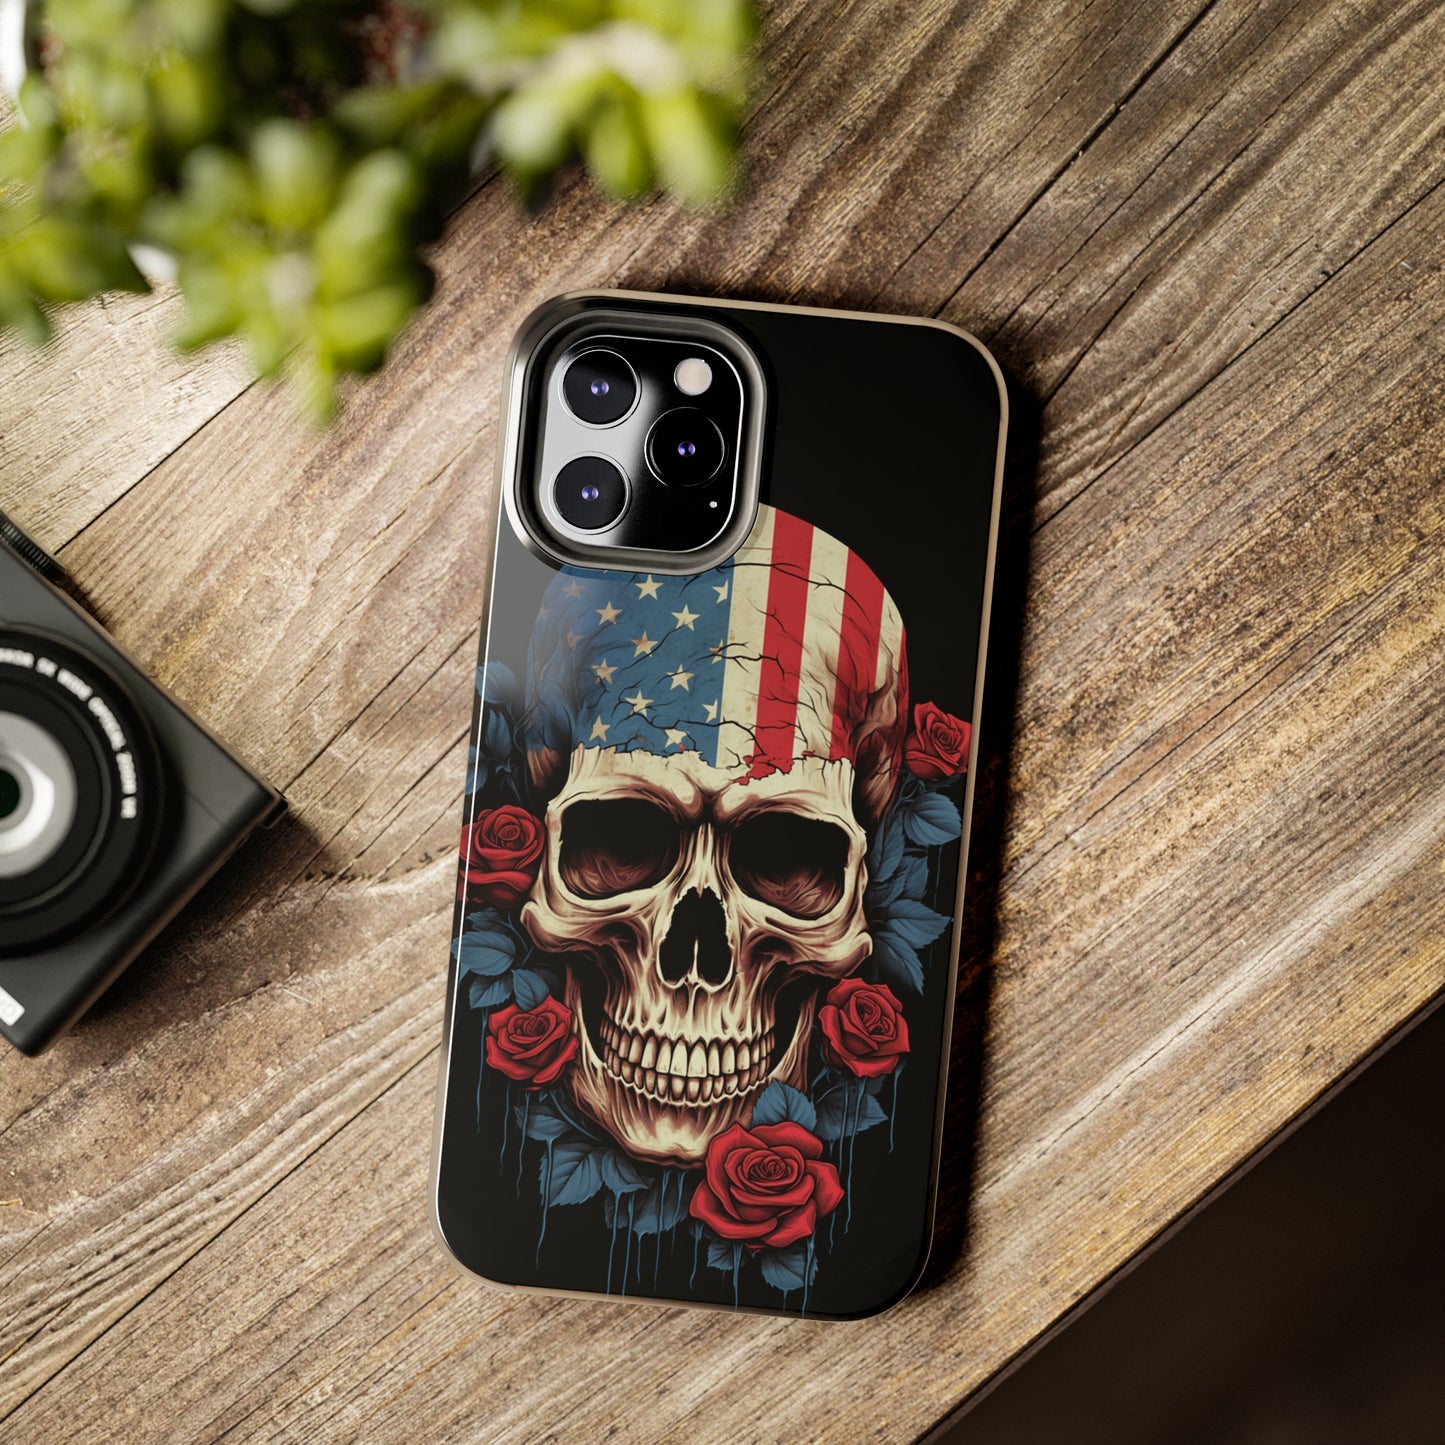 American Pride with an Edgy Spin: Skull USA Flag iPhone Case – Modern Protection Meets Patriotic Design